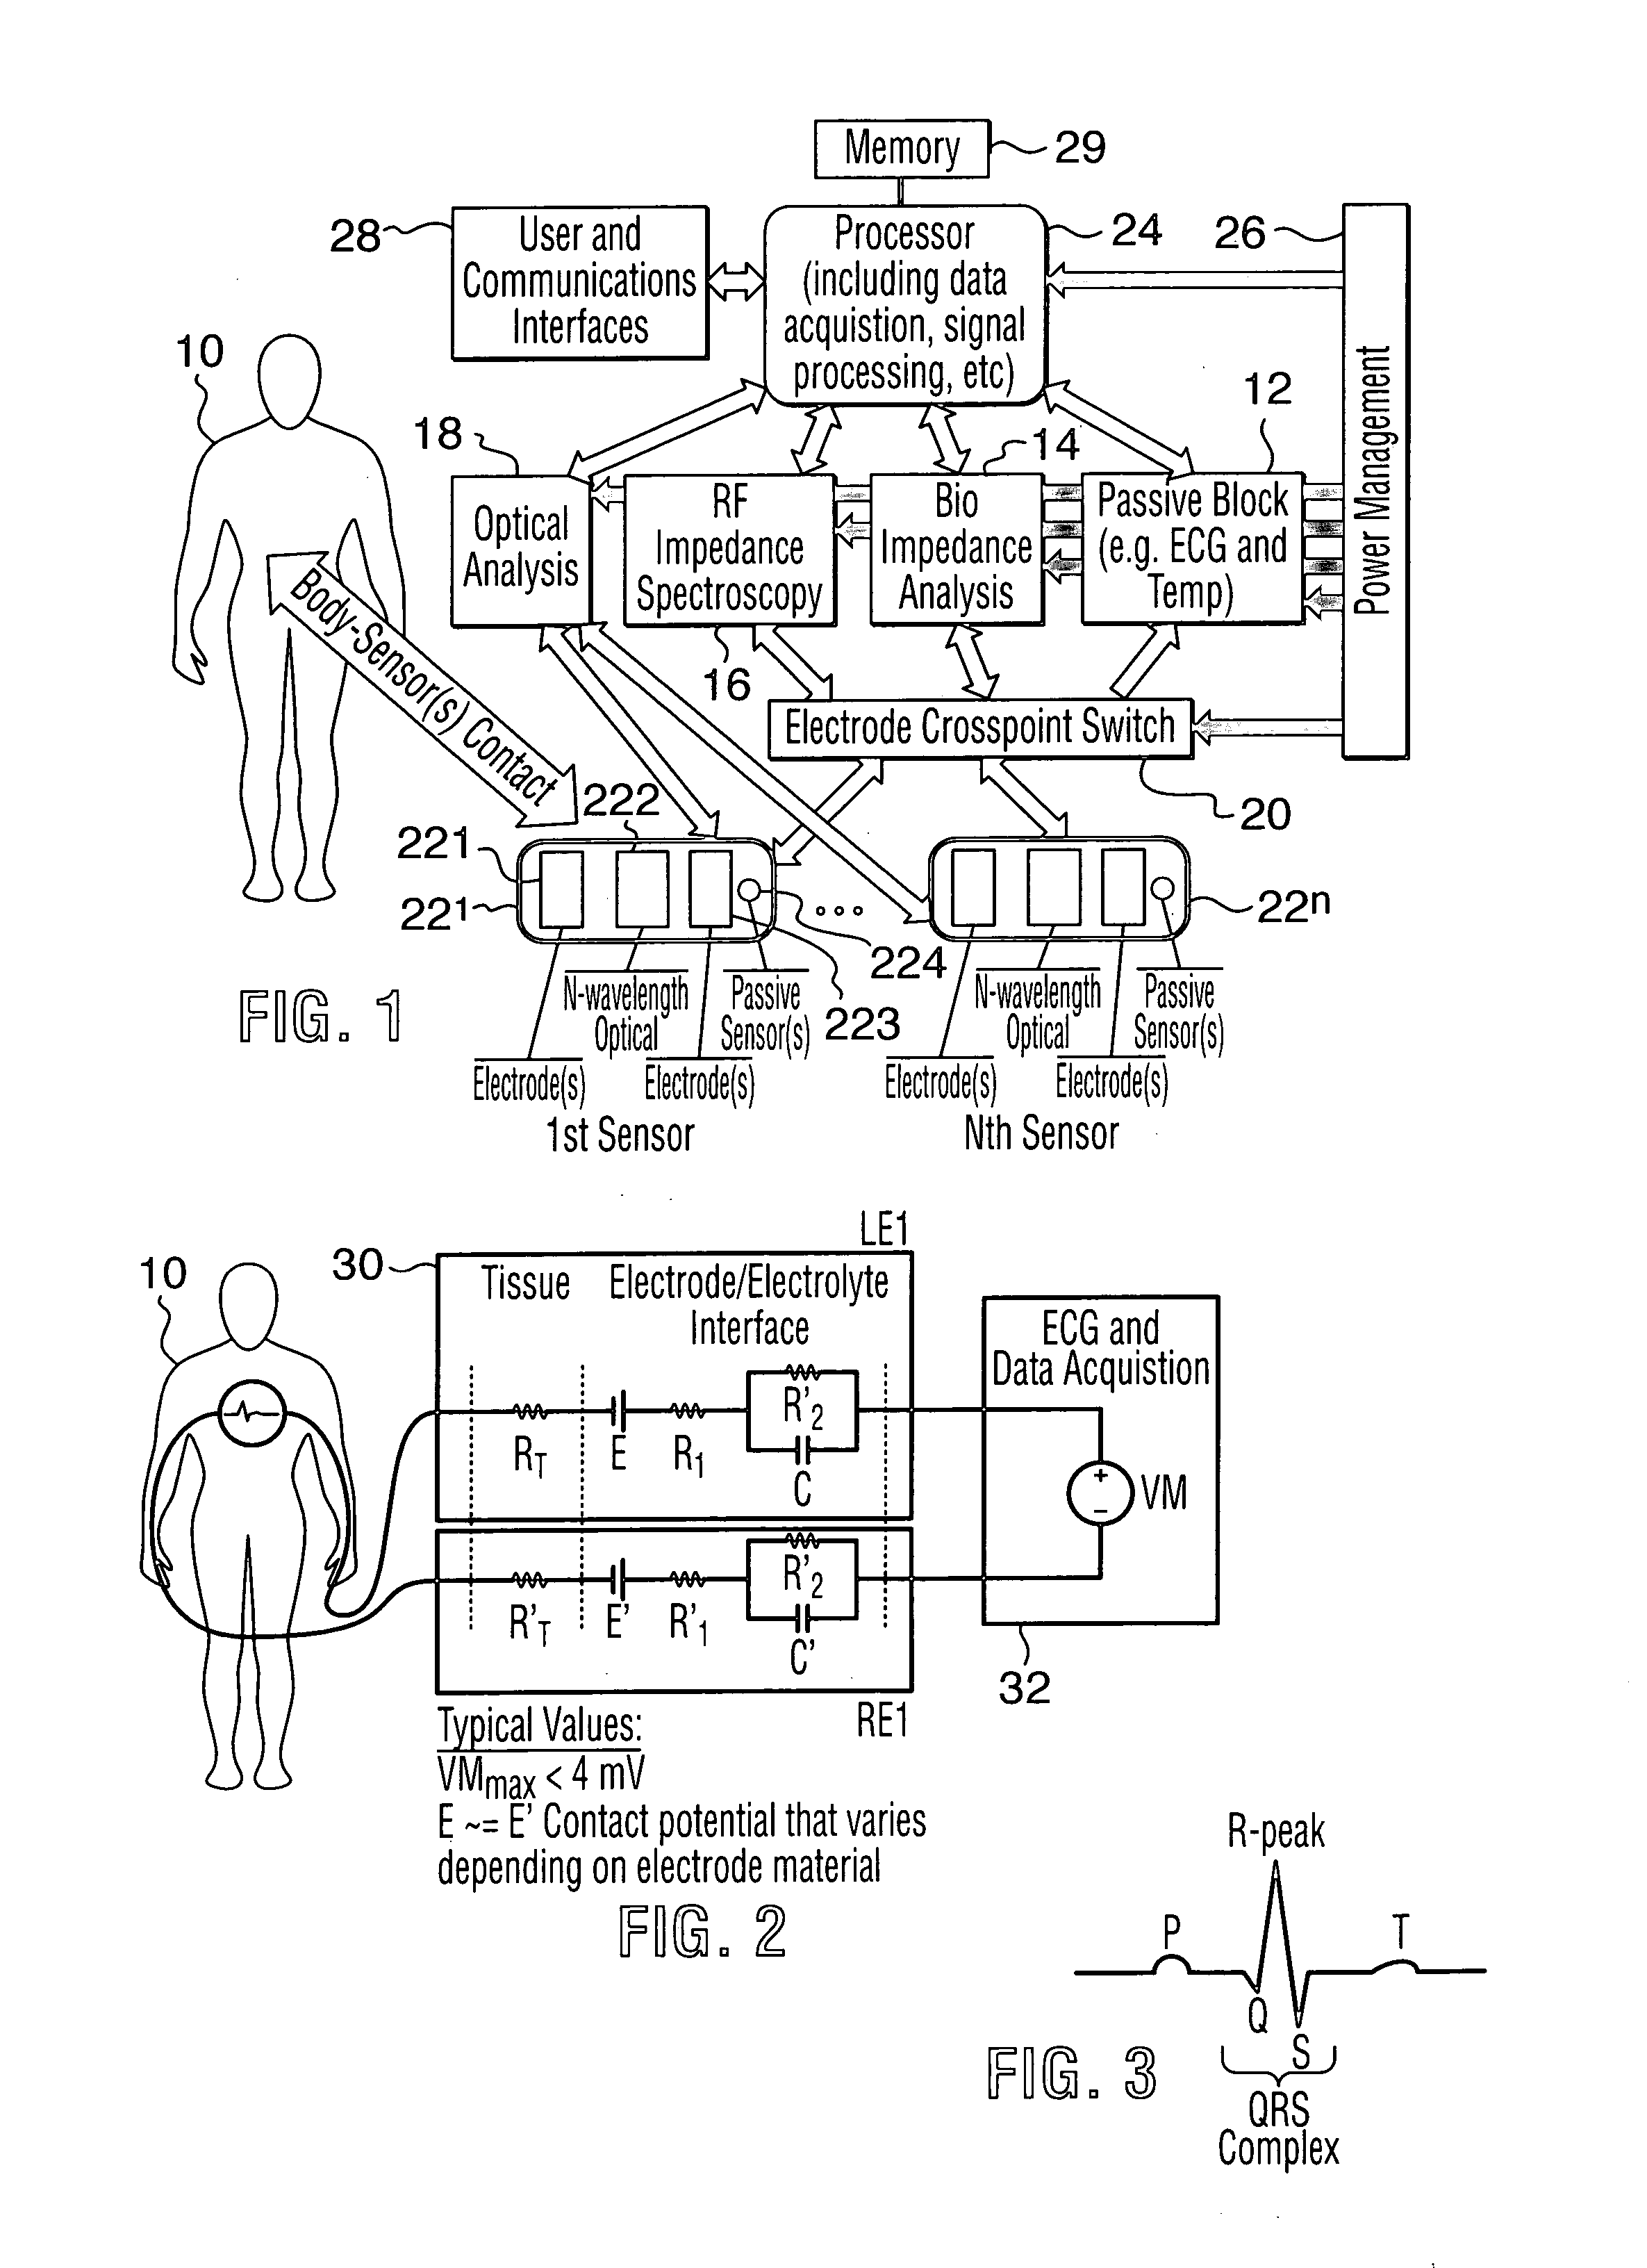 Non-invasive method and apparatus for determining a physiological parameter